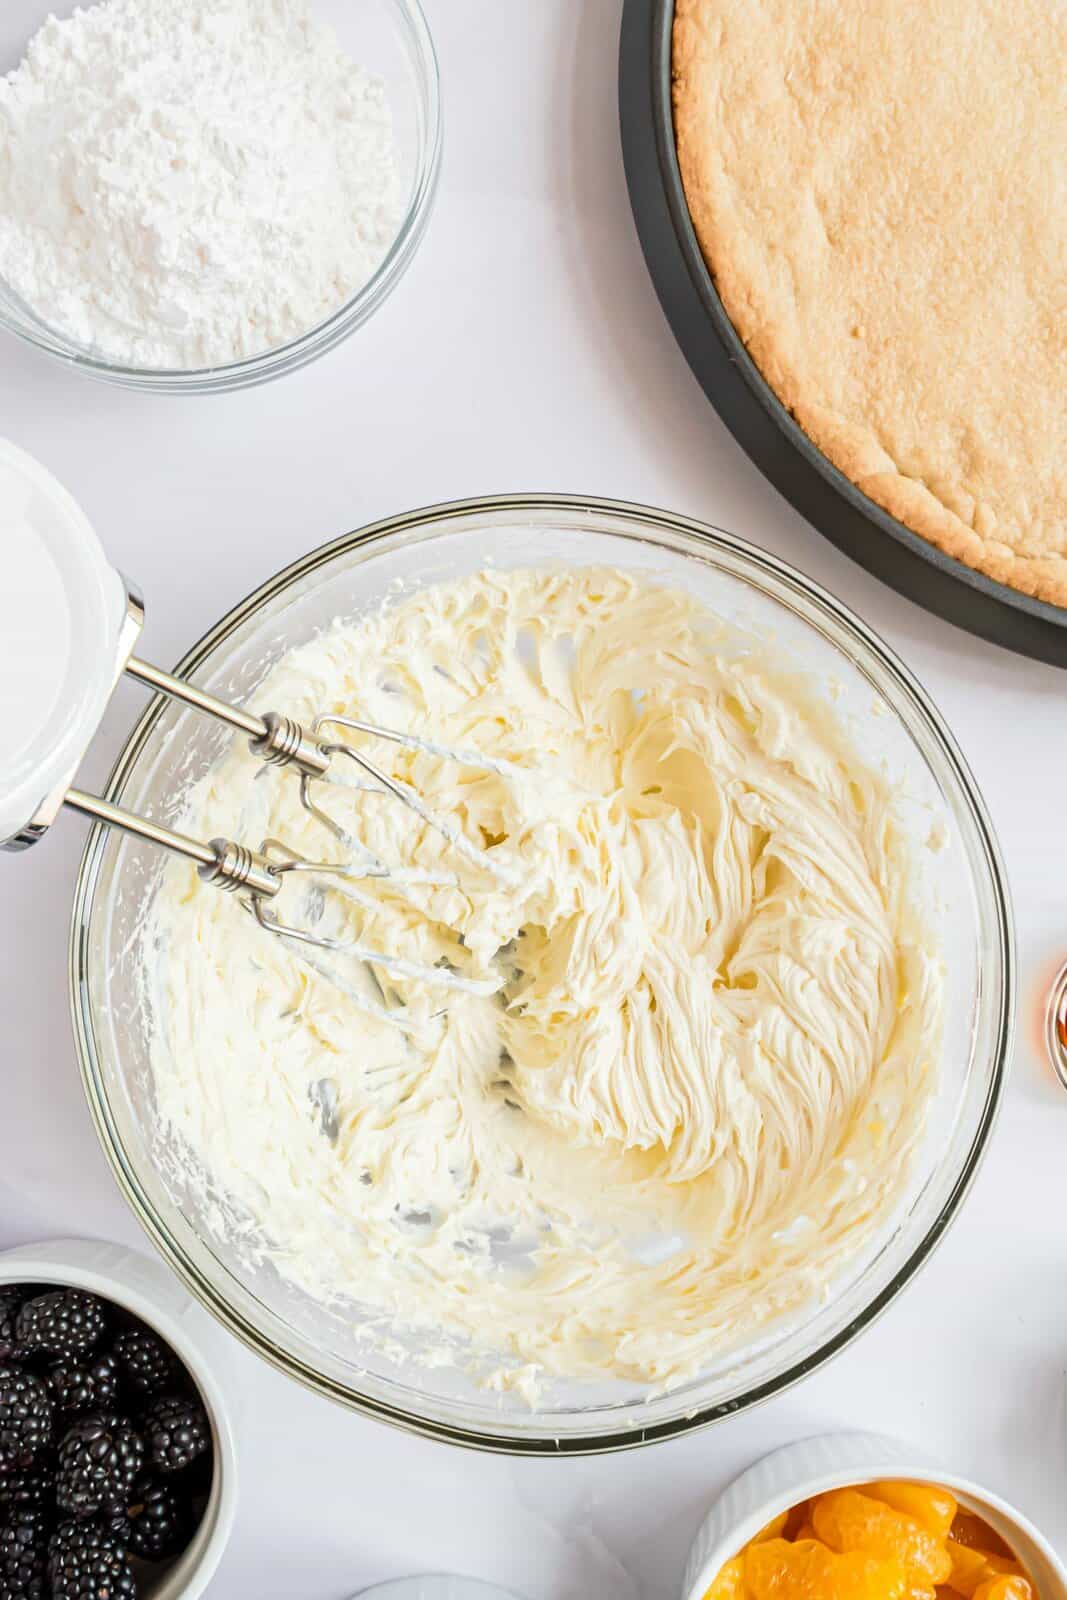 Butter and cream cheese beaten together in bowl.